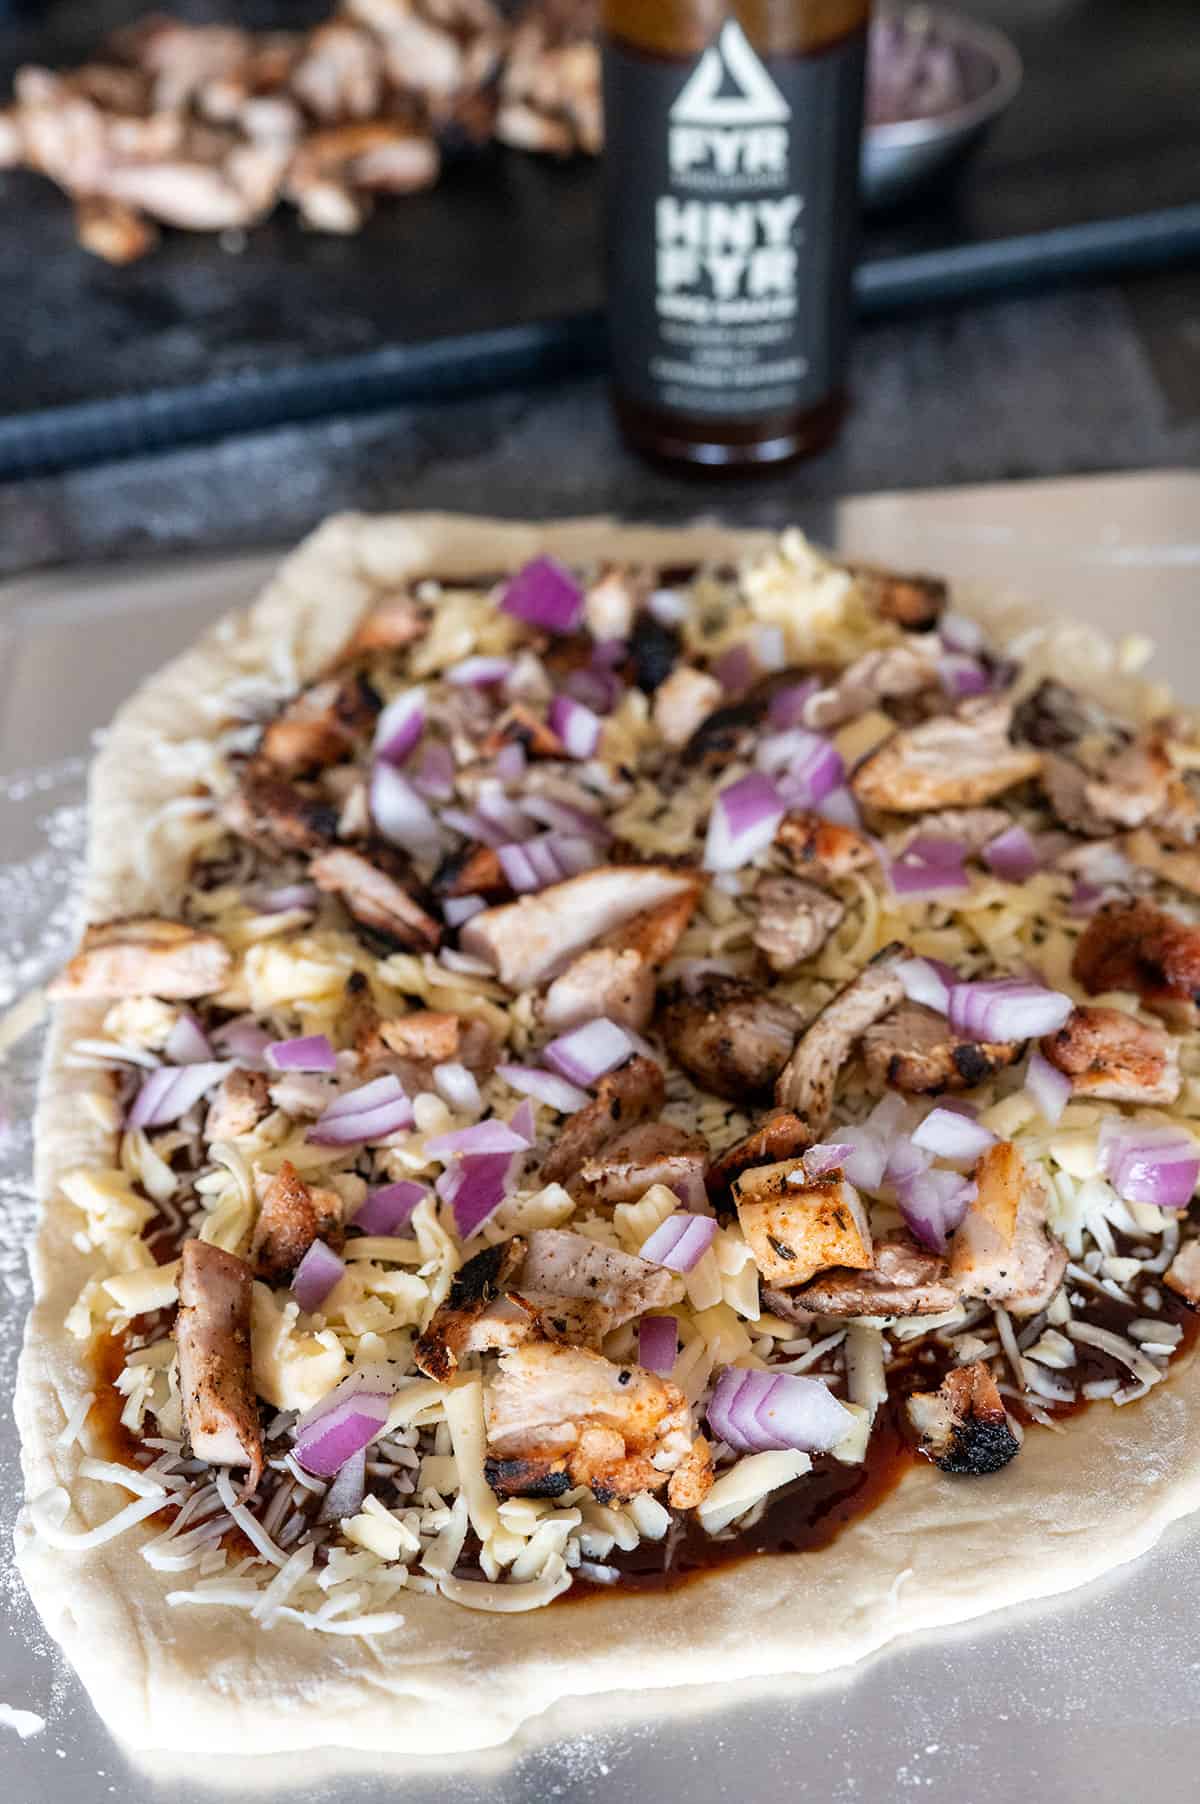 Whole pizza with barbecue chicken.